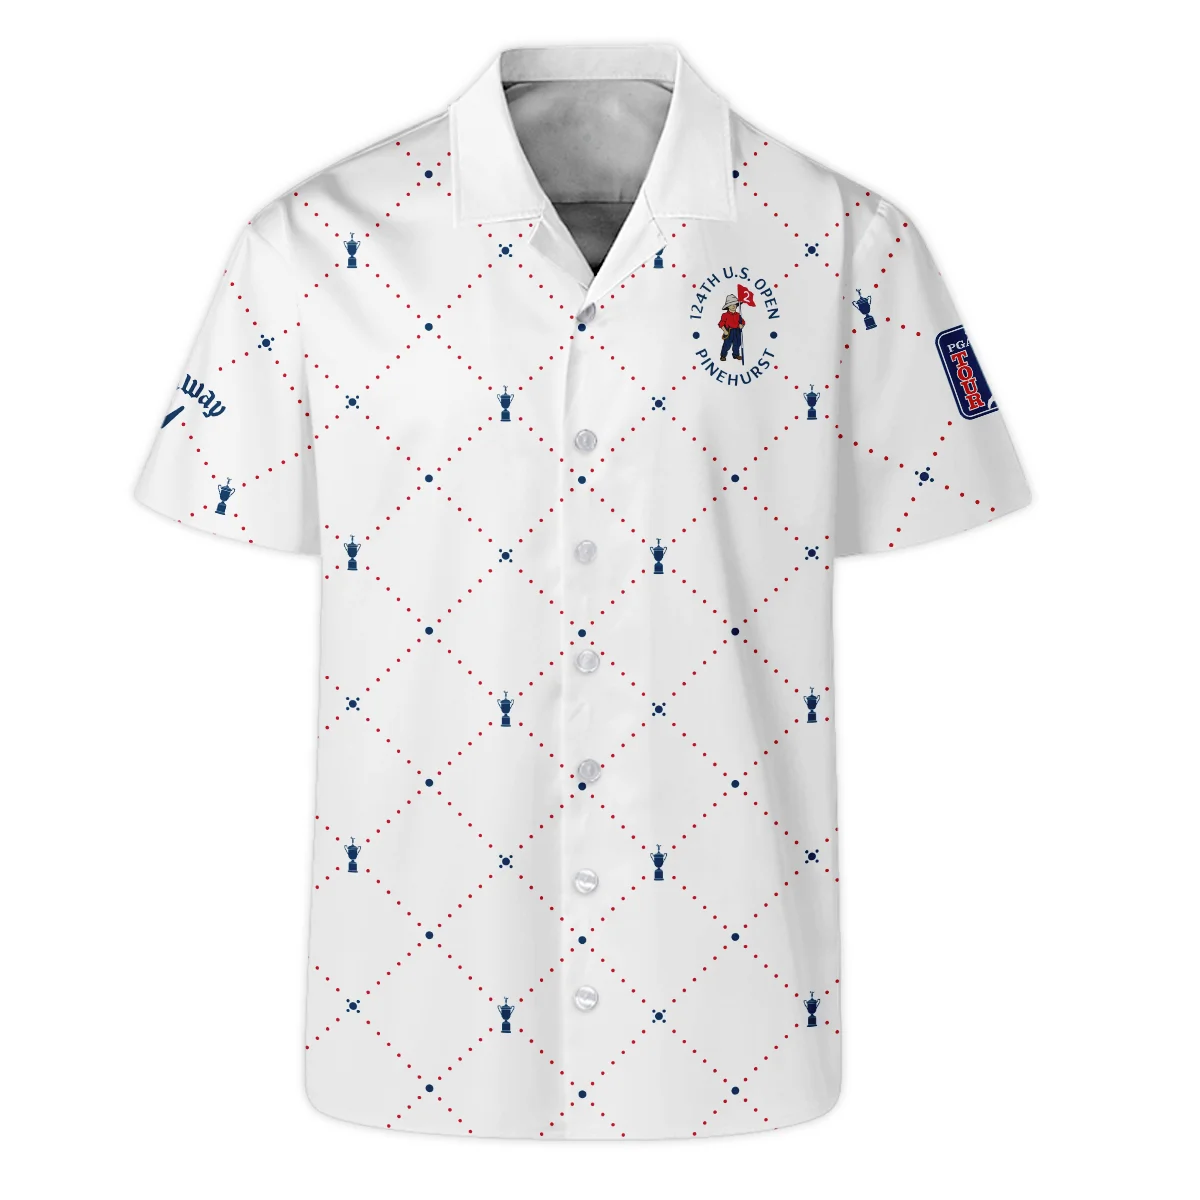 Argyle Pattern With Cup 124th U.S. Open Pinehurst Callaway Polo Shirt Style Classic Polo Shirt For Men